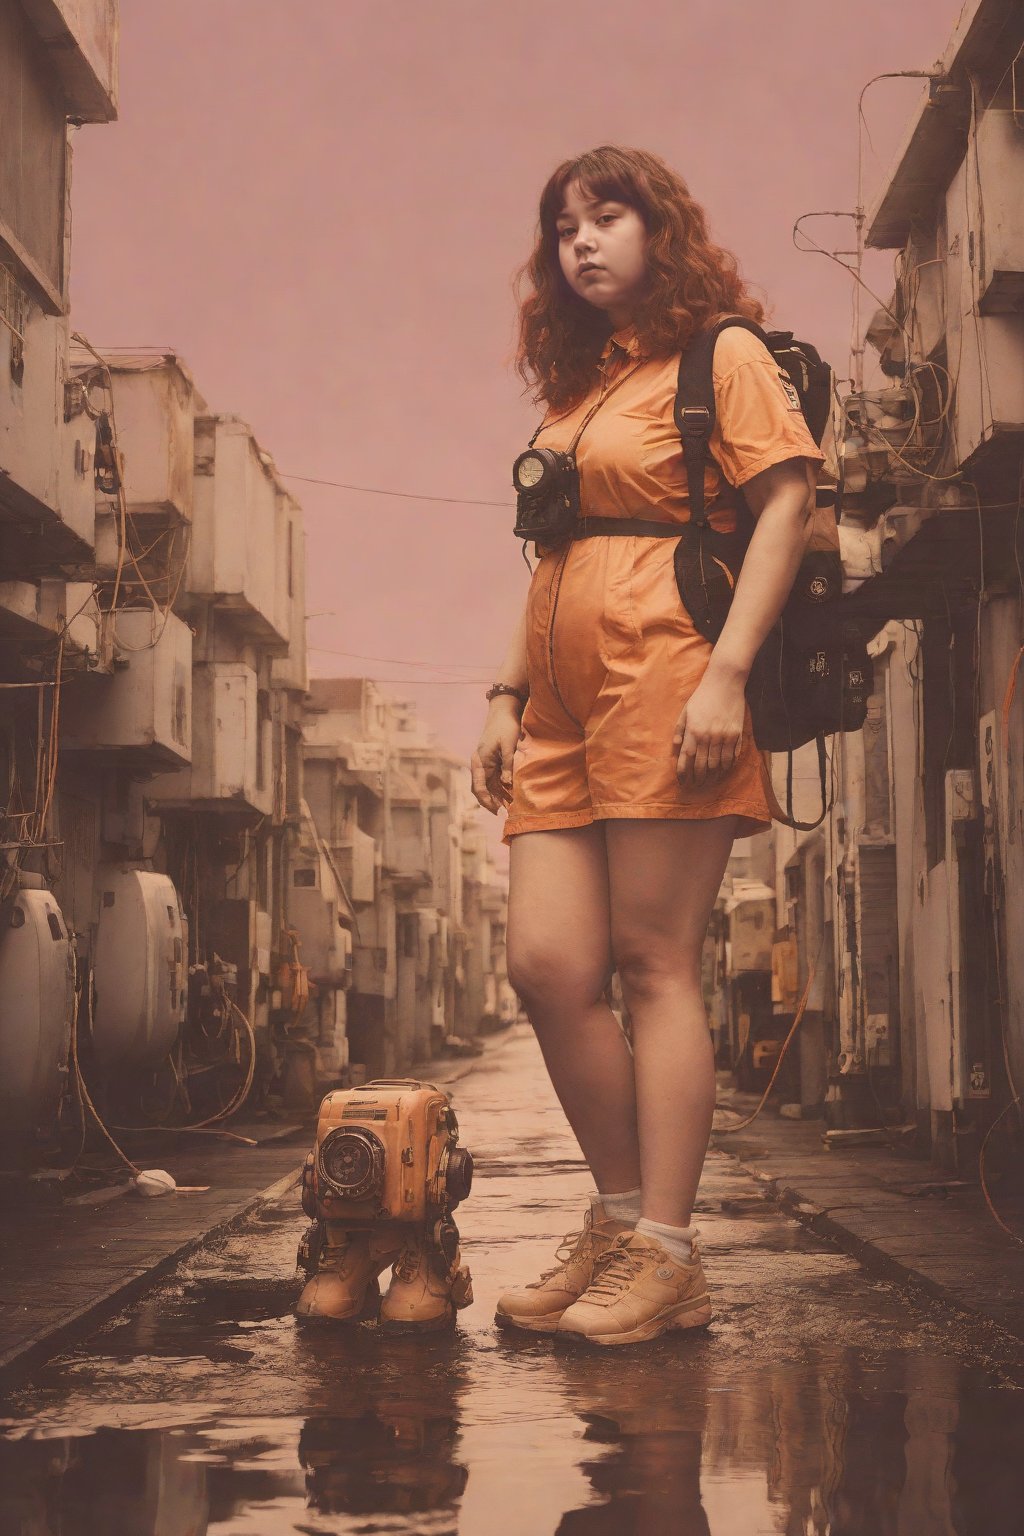 photograph, highly detailed, chubby Deep-Sea Diver (1girl:1.1) , she is dressed in Process Art fashion style T-shirt dress and sneakers, her hair is Caramel, Fur-Trimmed Mauve Robotic Legs, soft focus, Short exposure, film camera, Depth of field 270mm, Monochromatic orange filter, RTX